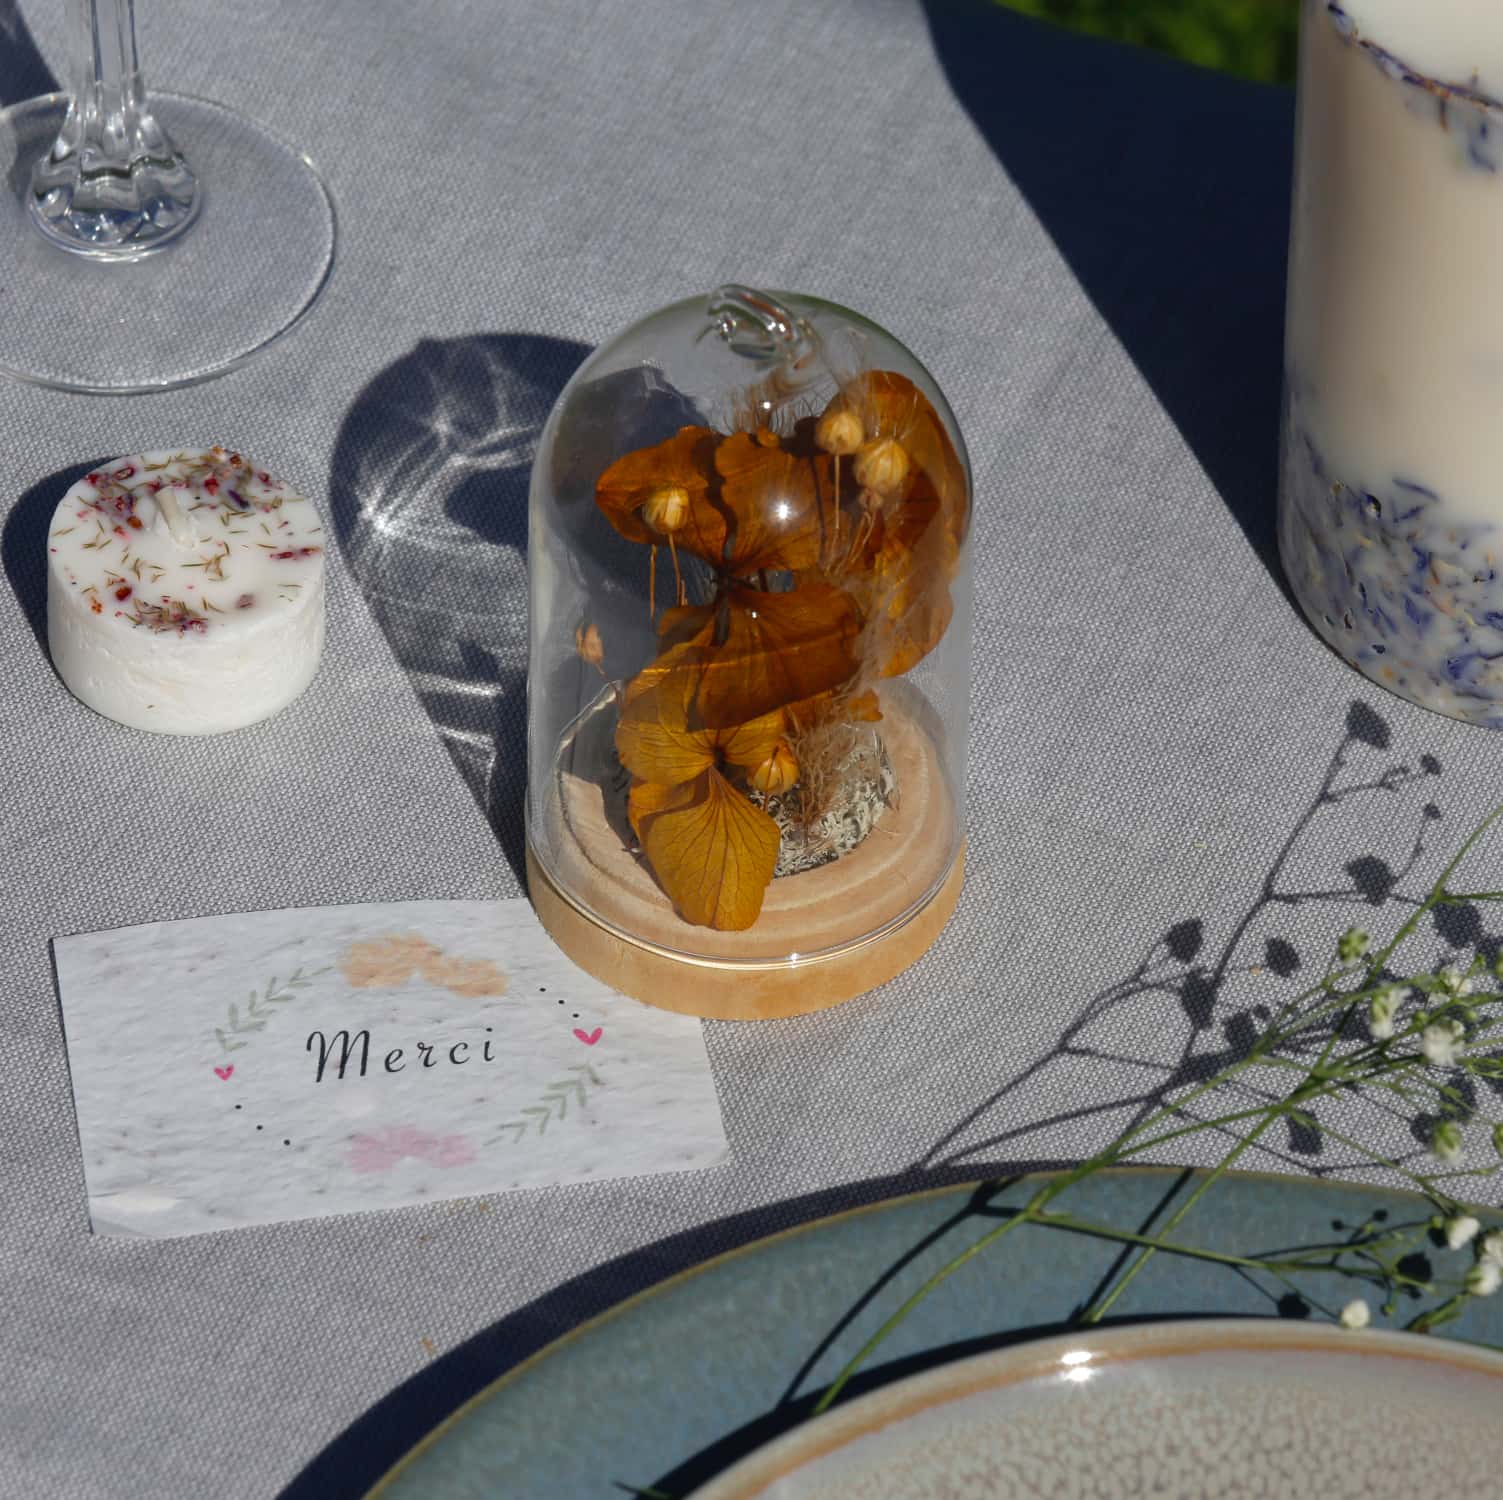 cloche moutarde merci couronne bougie table